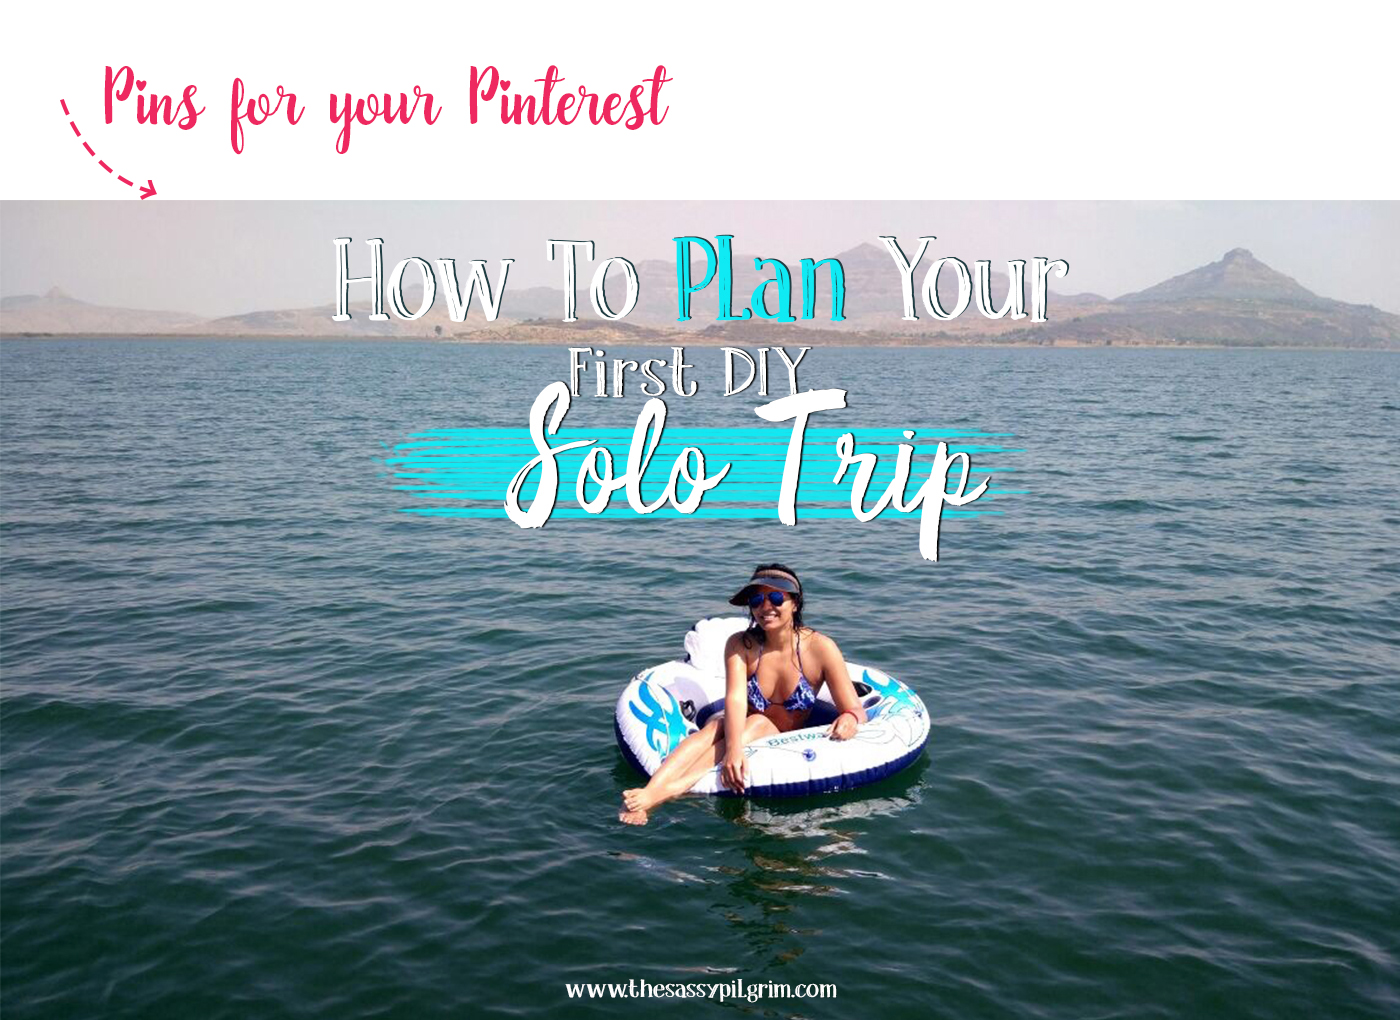 How_to_Plan_Your_first_diy_solo_trip_Female_Travel_Blog_Indian_The_sassy_pilgrim_blogger_Tips_Indonesia_